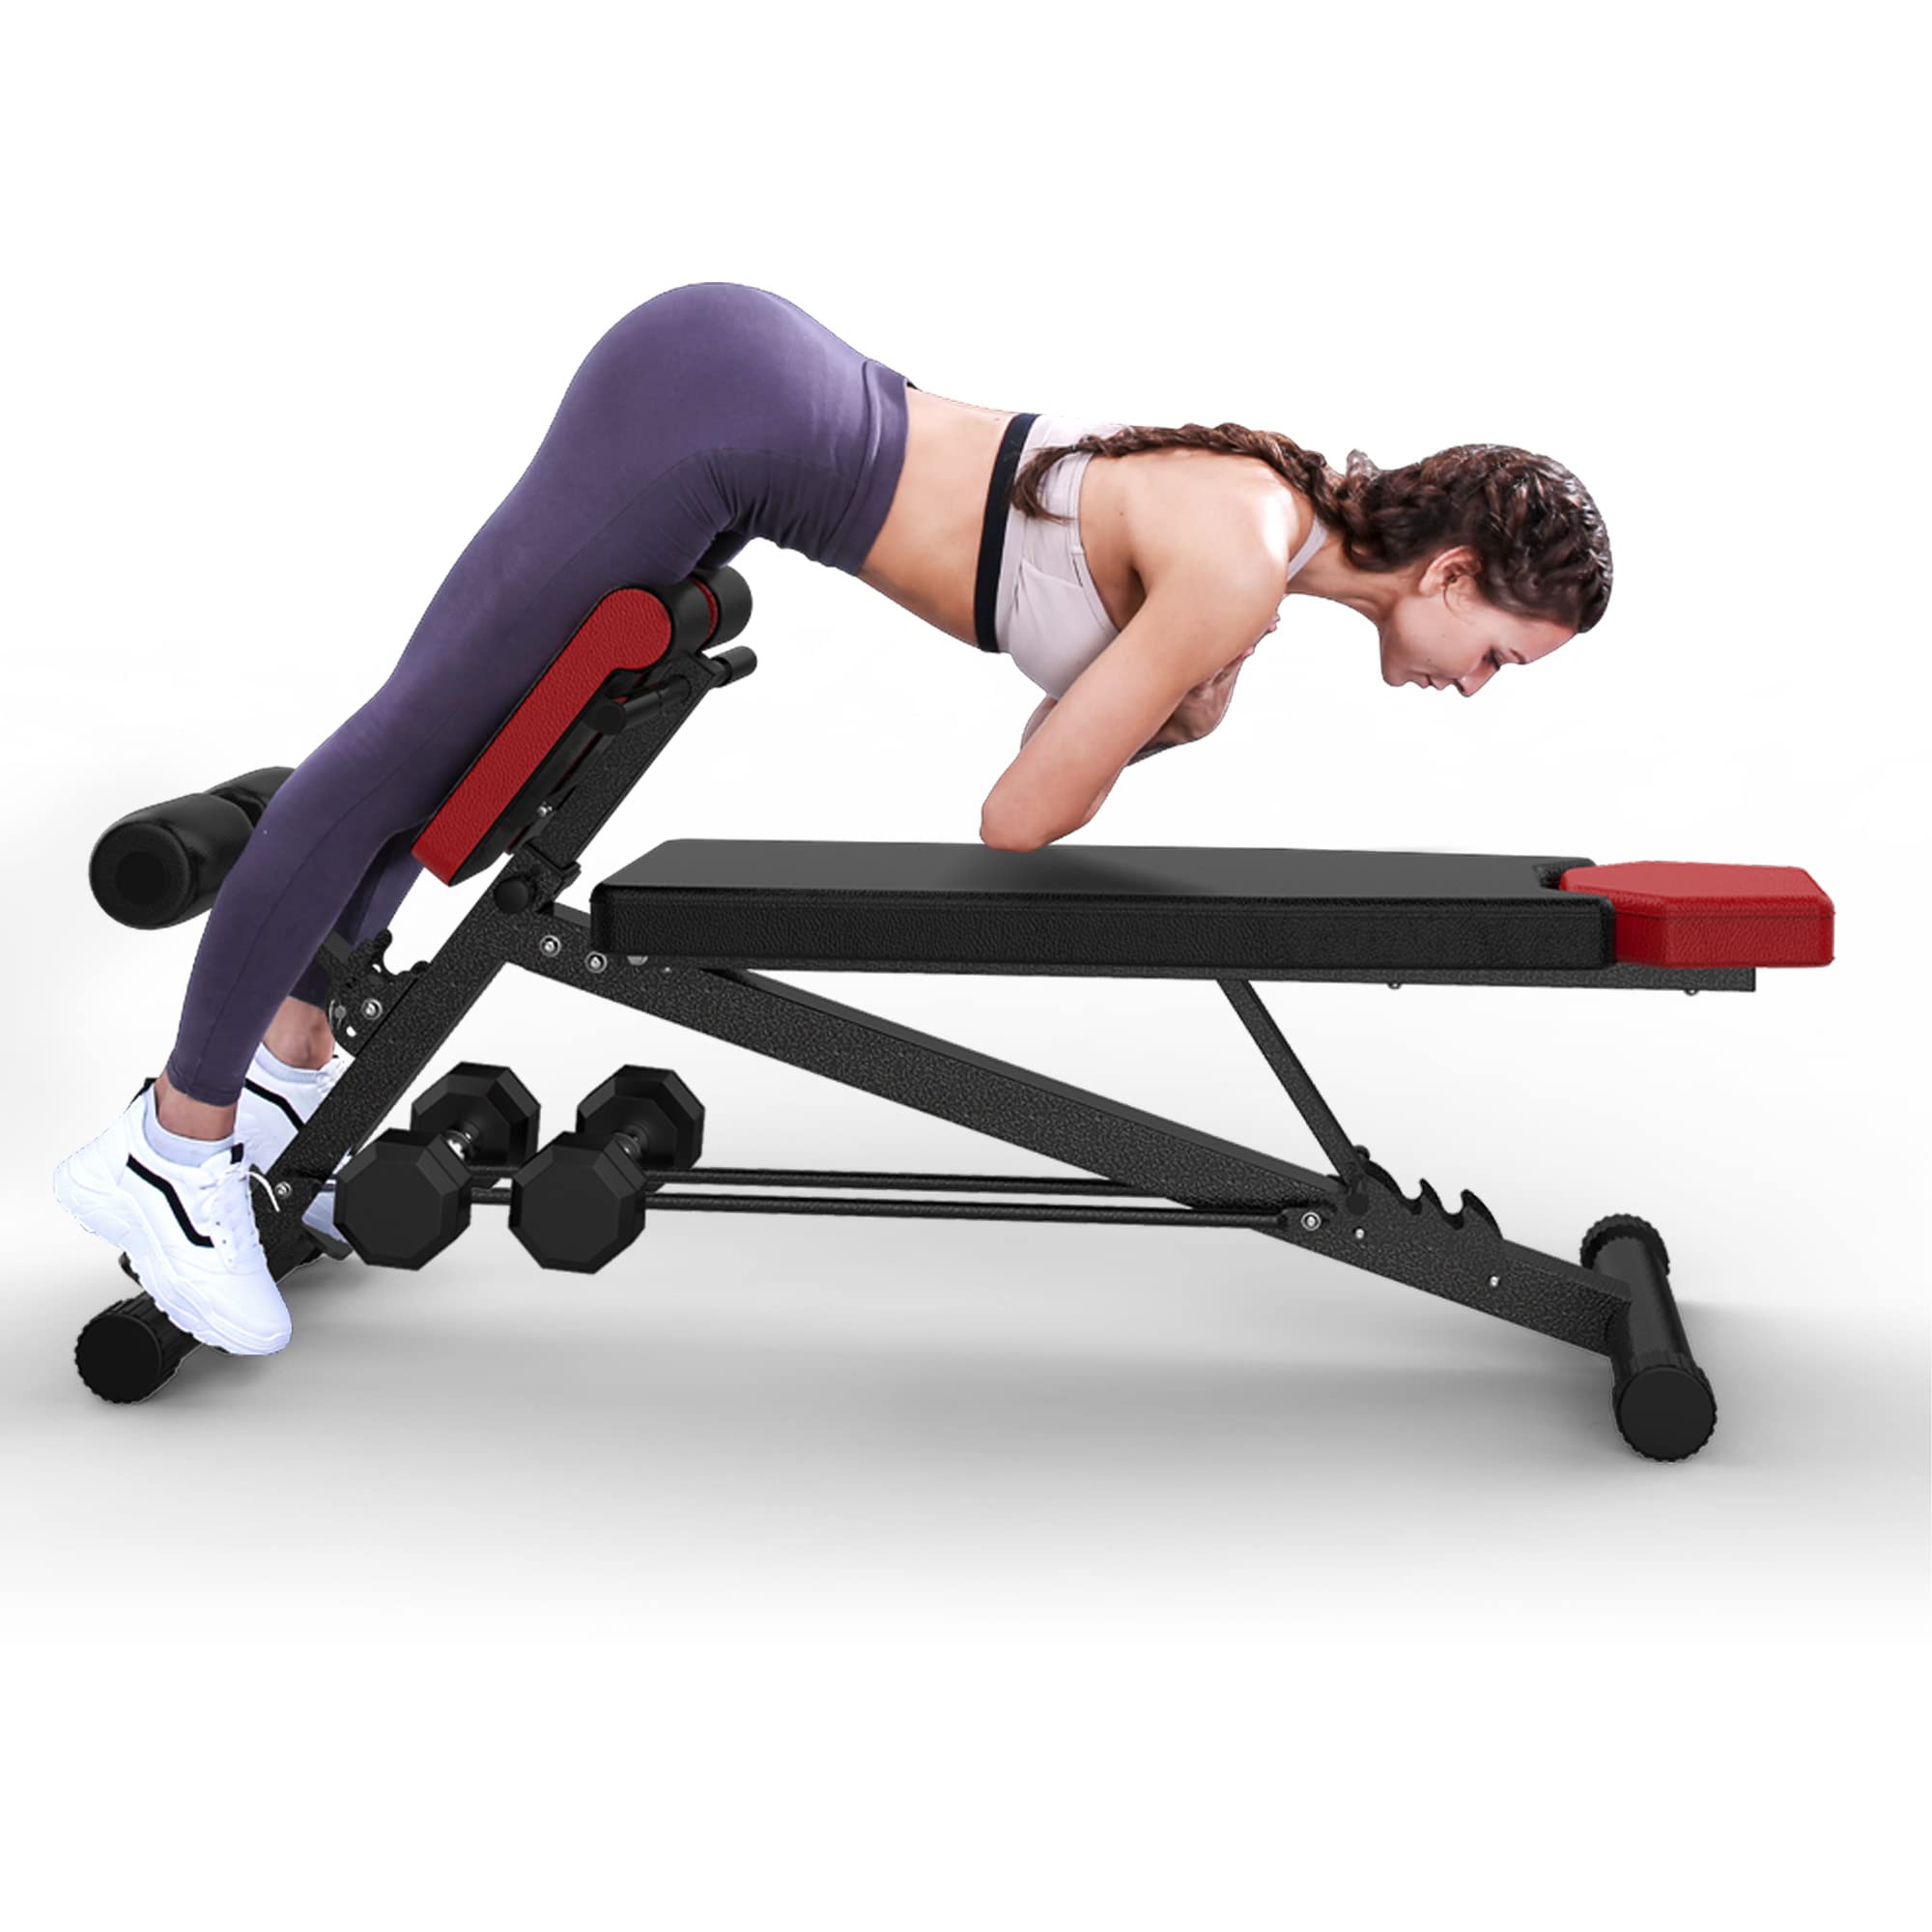 FINER FORM Multi-Functional Adjustable Weight Bench for Total Body Workout – Hyper Back Extension, Roman Chair, Adjustable Ab Sit up Bench, Decline Bench, Flat Bench. Great Ab Workout Equipment